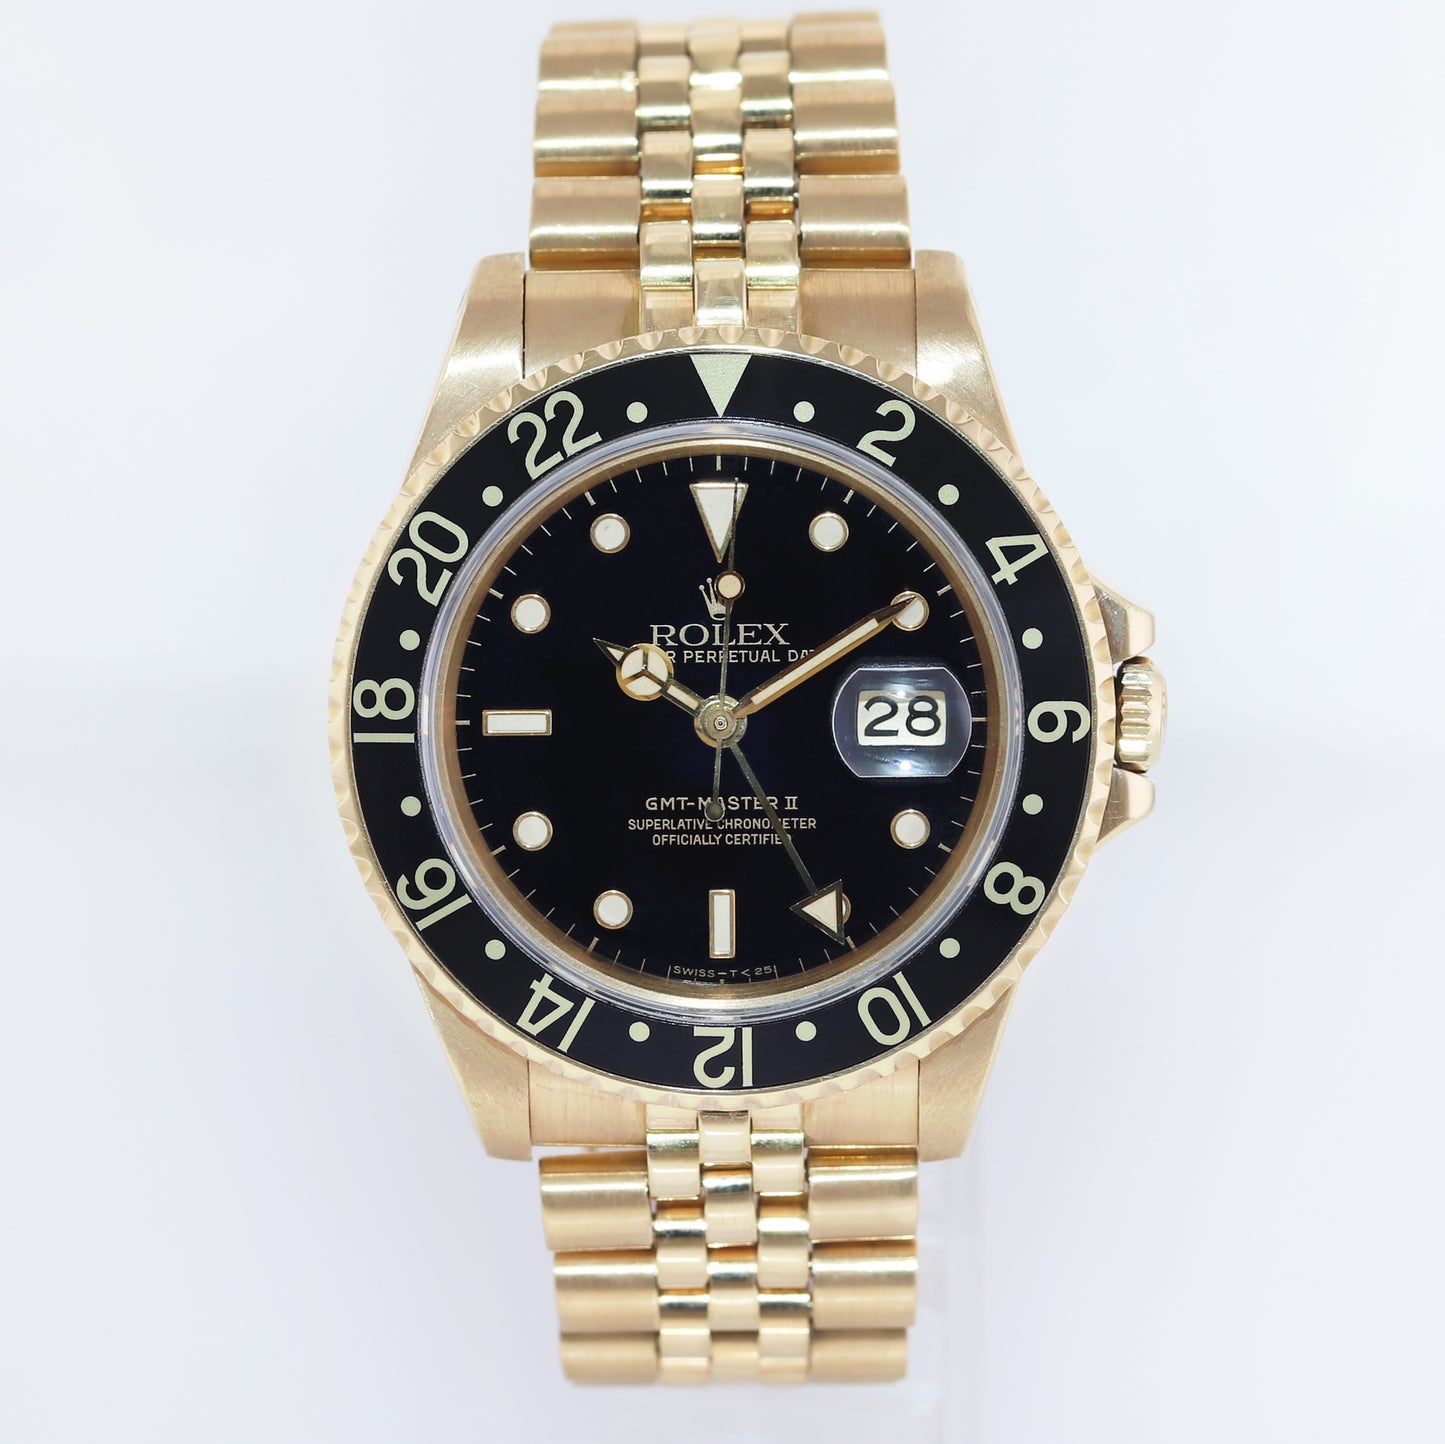 1985 PAPERS Rolex GMT Master 16758 Yellow Gold Jubilee Black Dial 40mm Watch